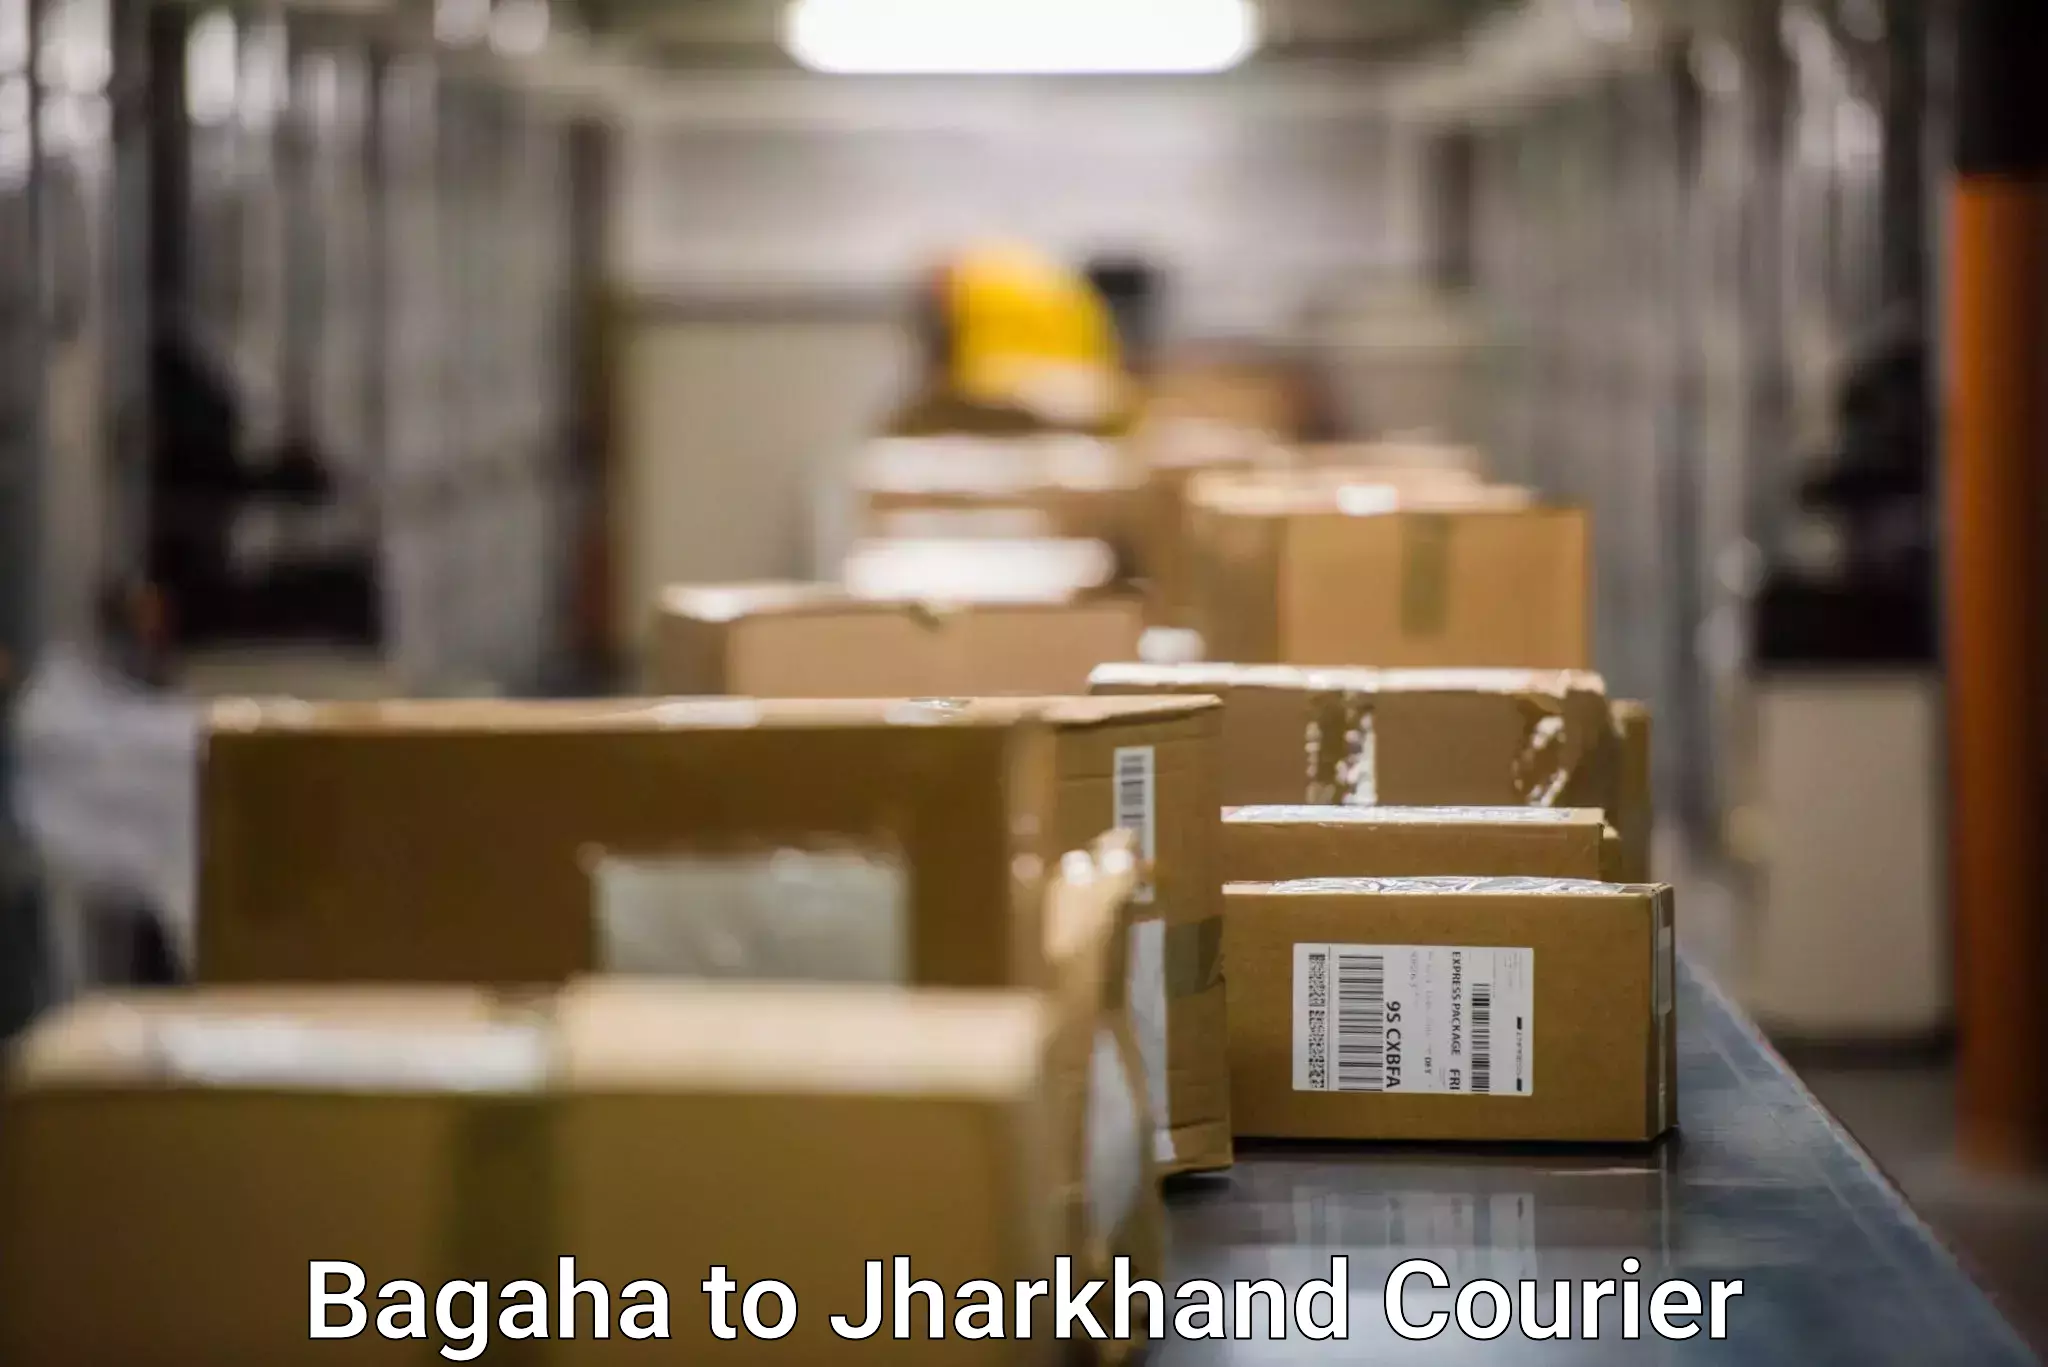 Courier service partnerships Bagaha to Domchanch